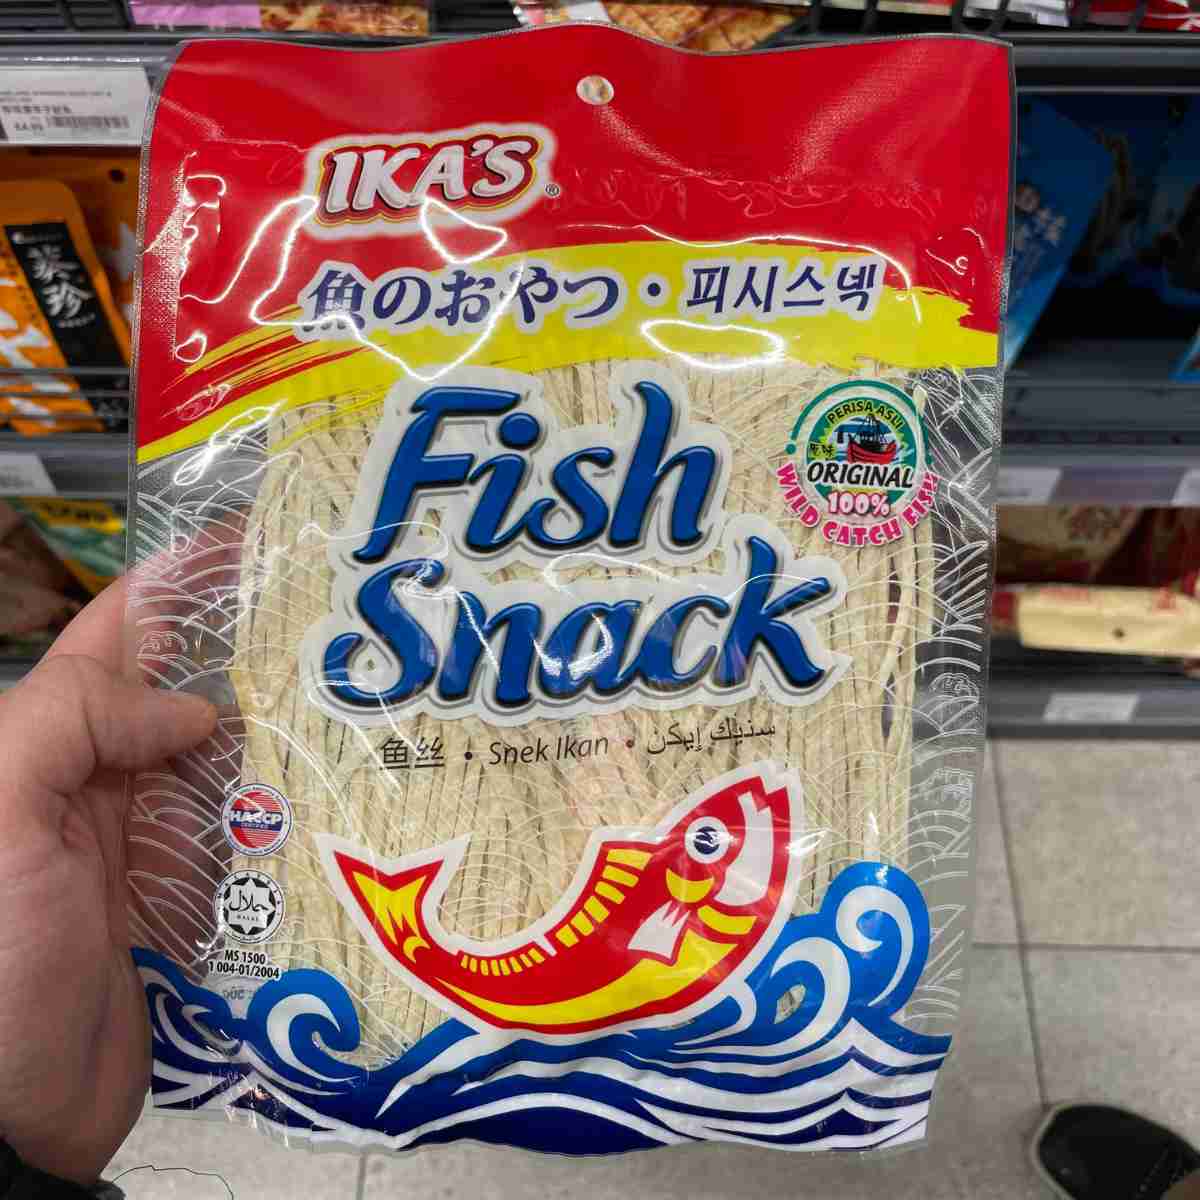 Dried fish fillet asian snack